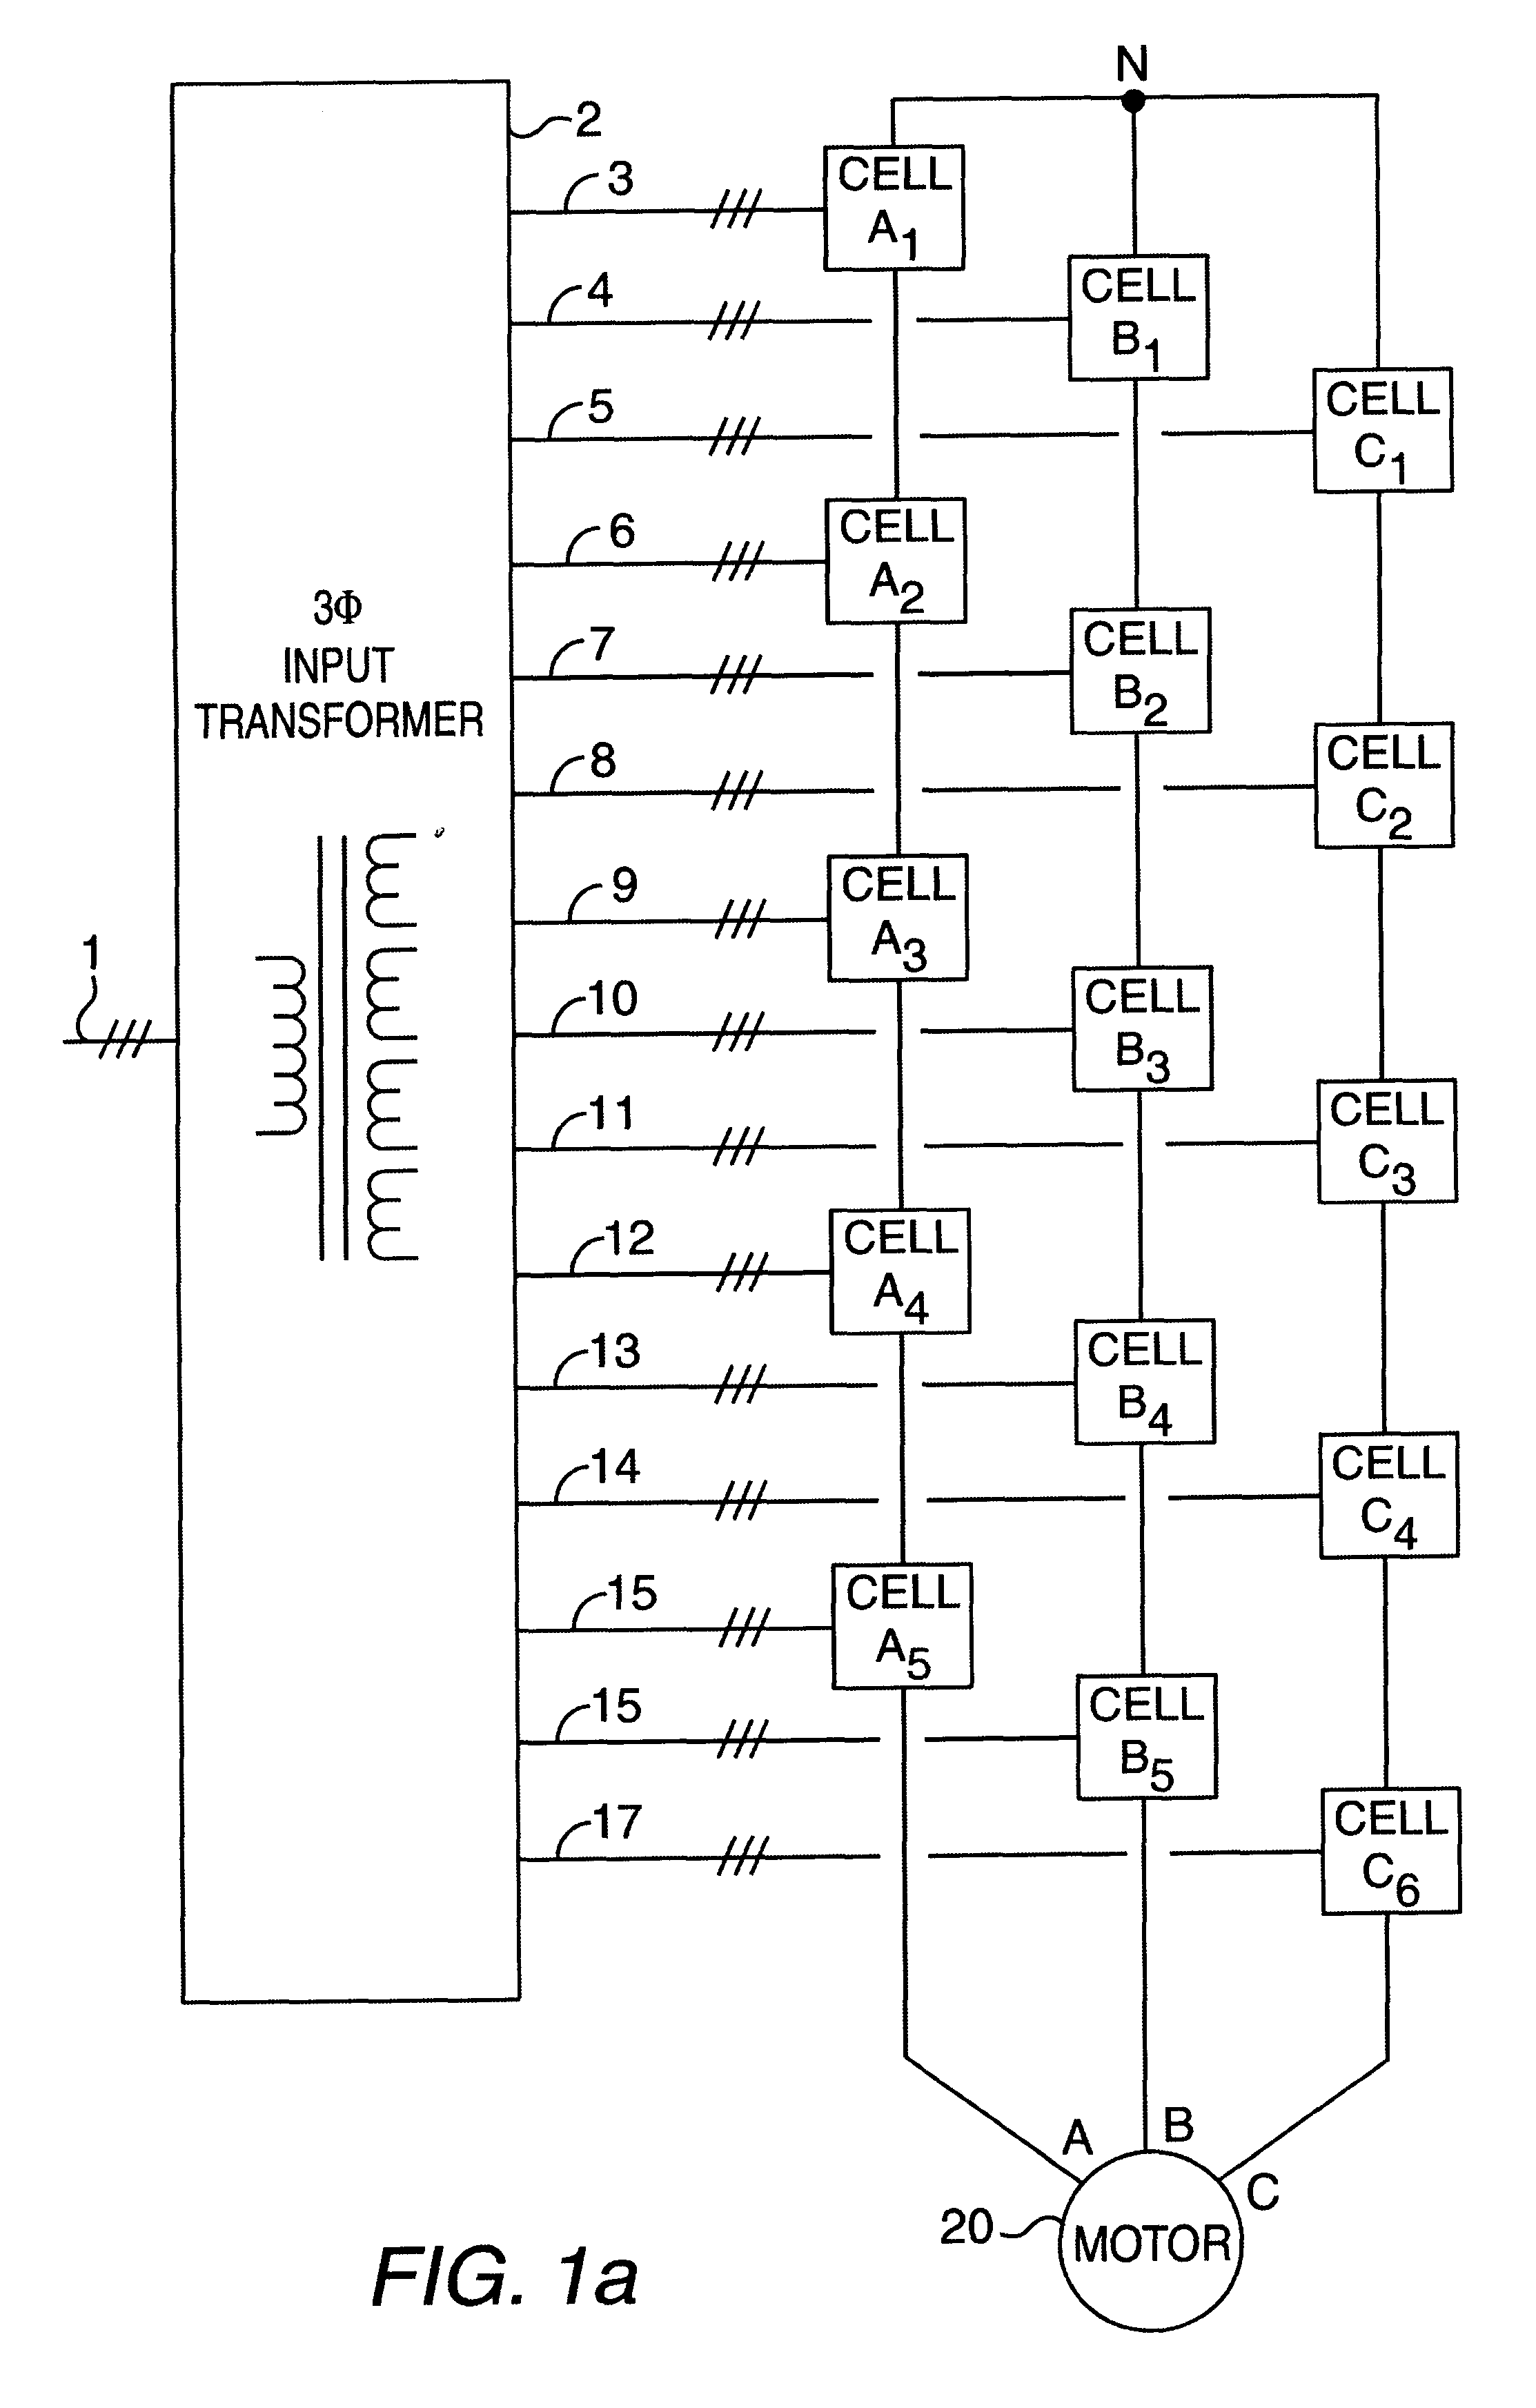 Multiphase power supply with series connected power cells with failed cell bypass